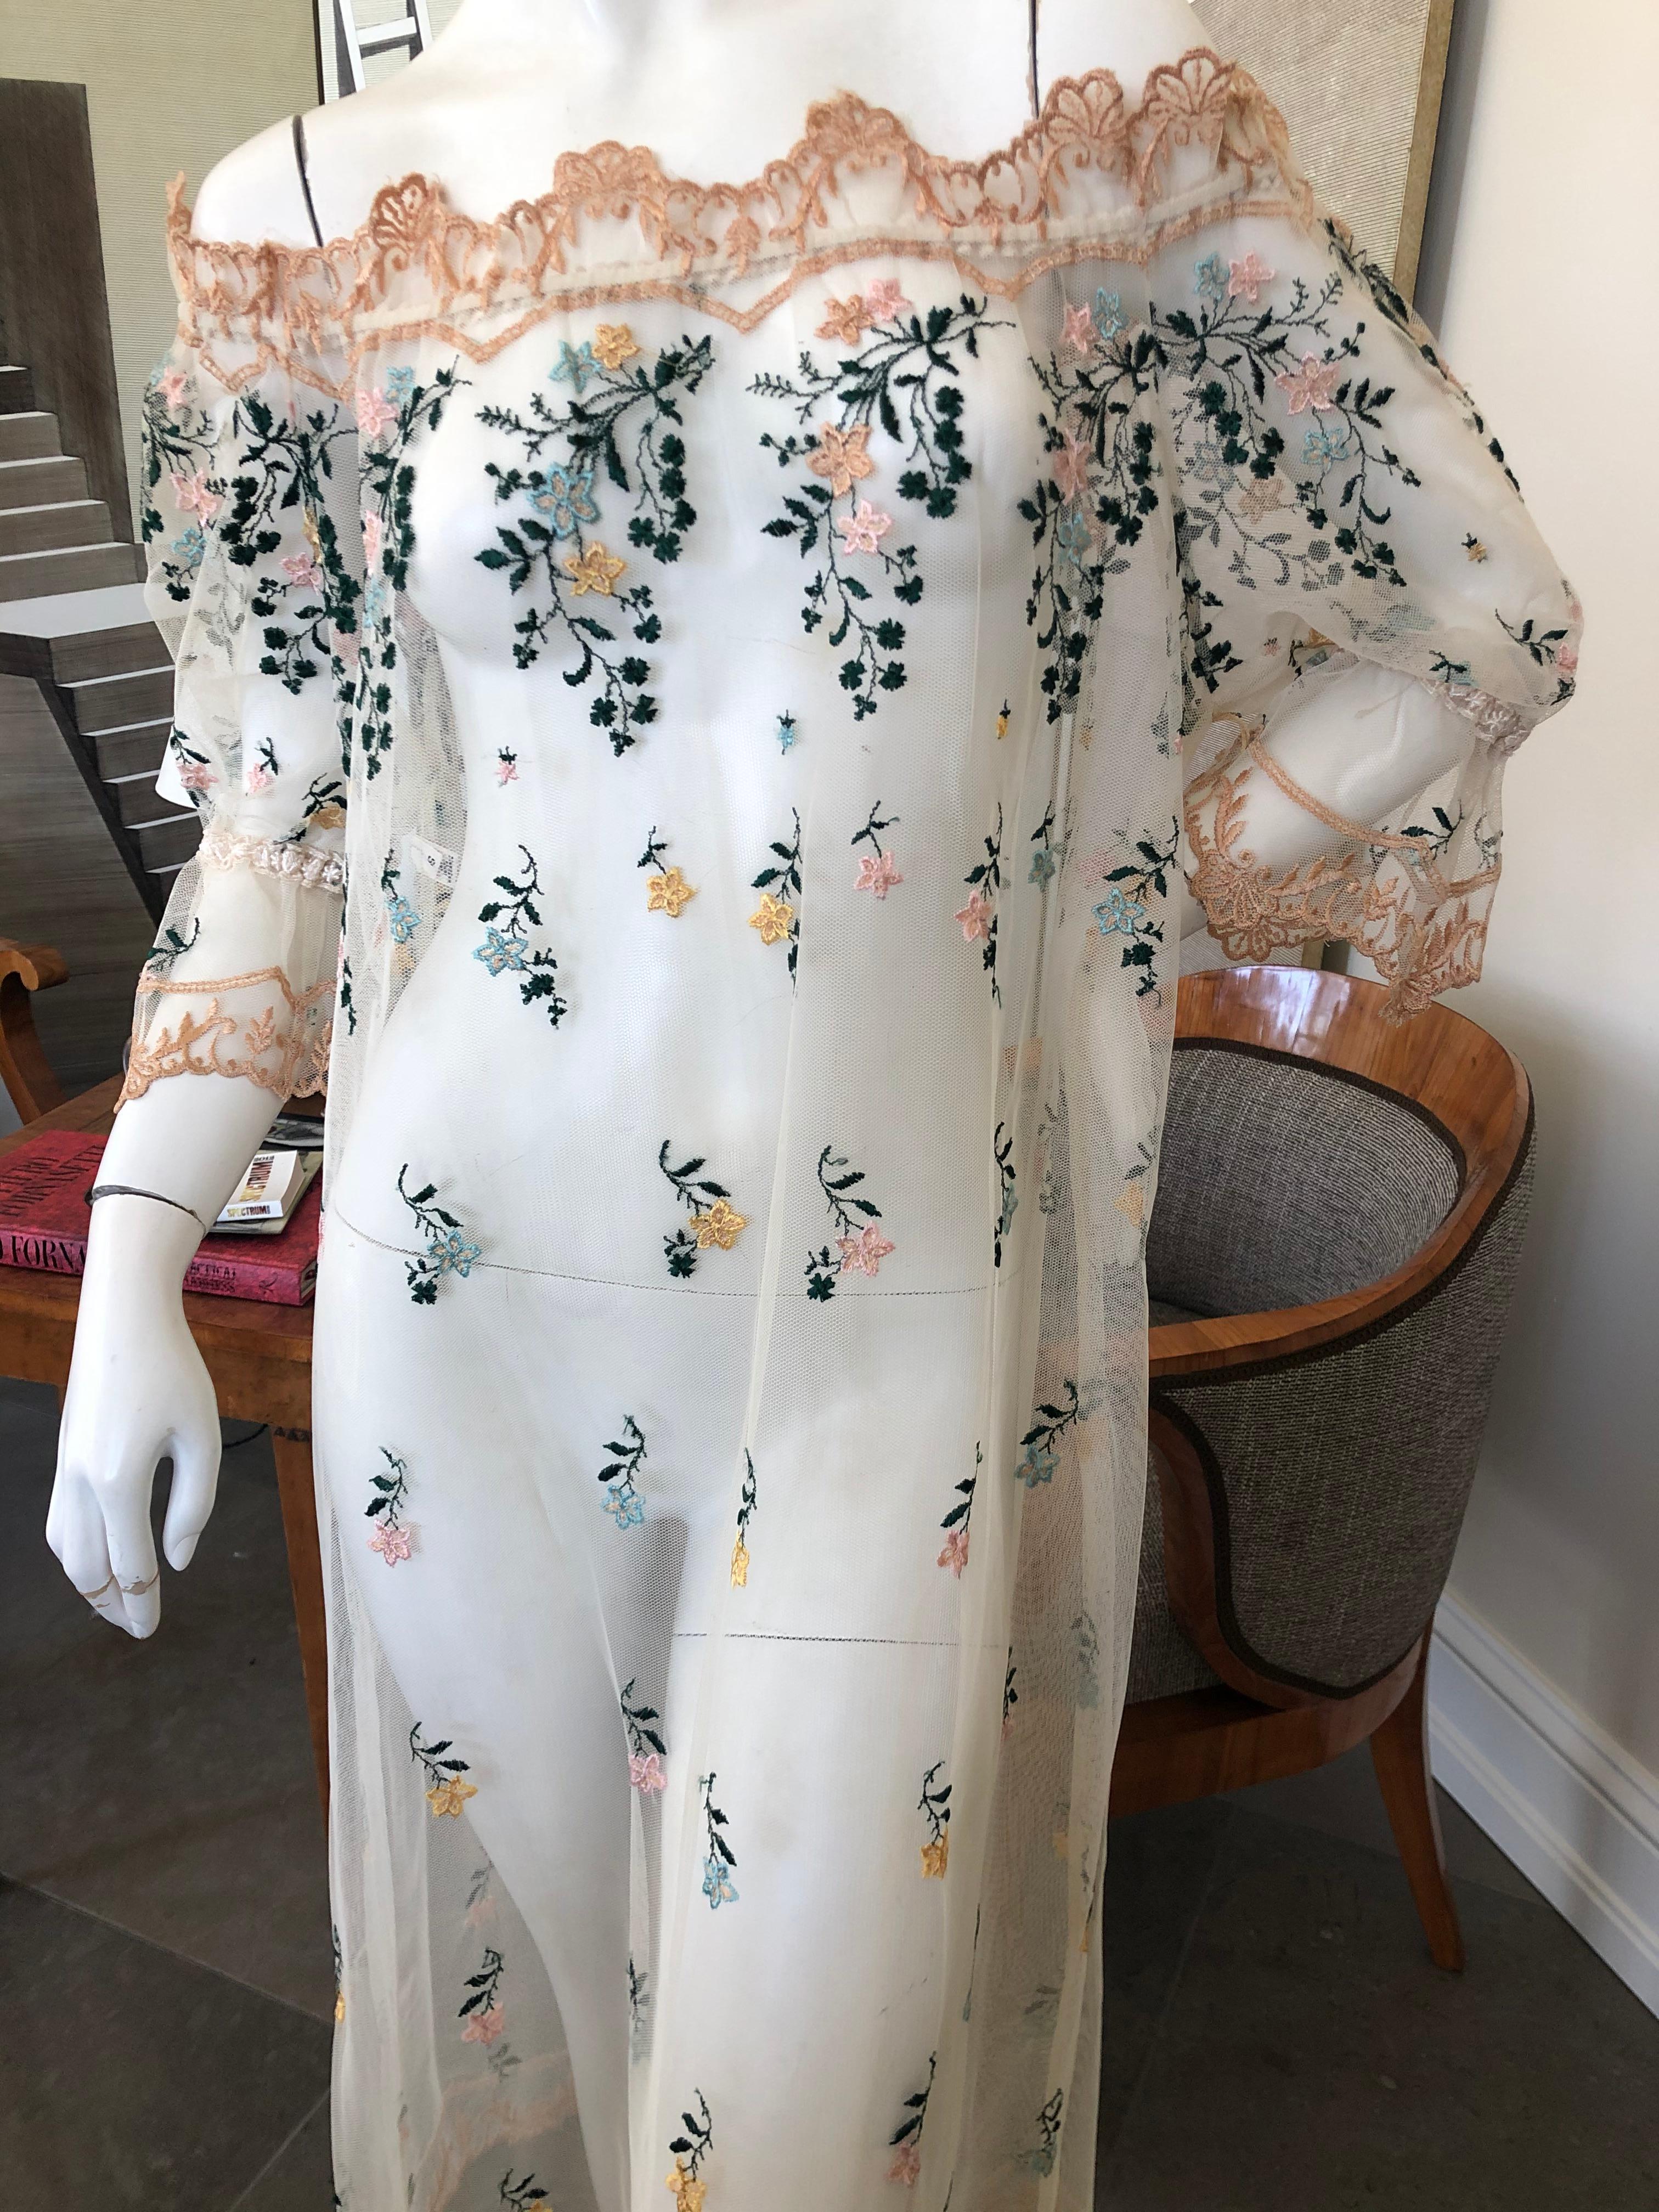 Giorgio di Sant'Angelo Sheer Embroidered Off the Shoulder Rich Hippie Dress In Excellent Condition For Sale In Cloverdale, CA